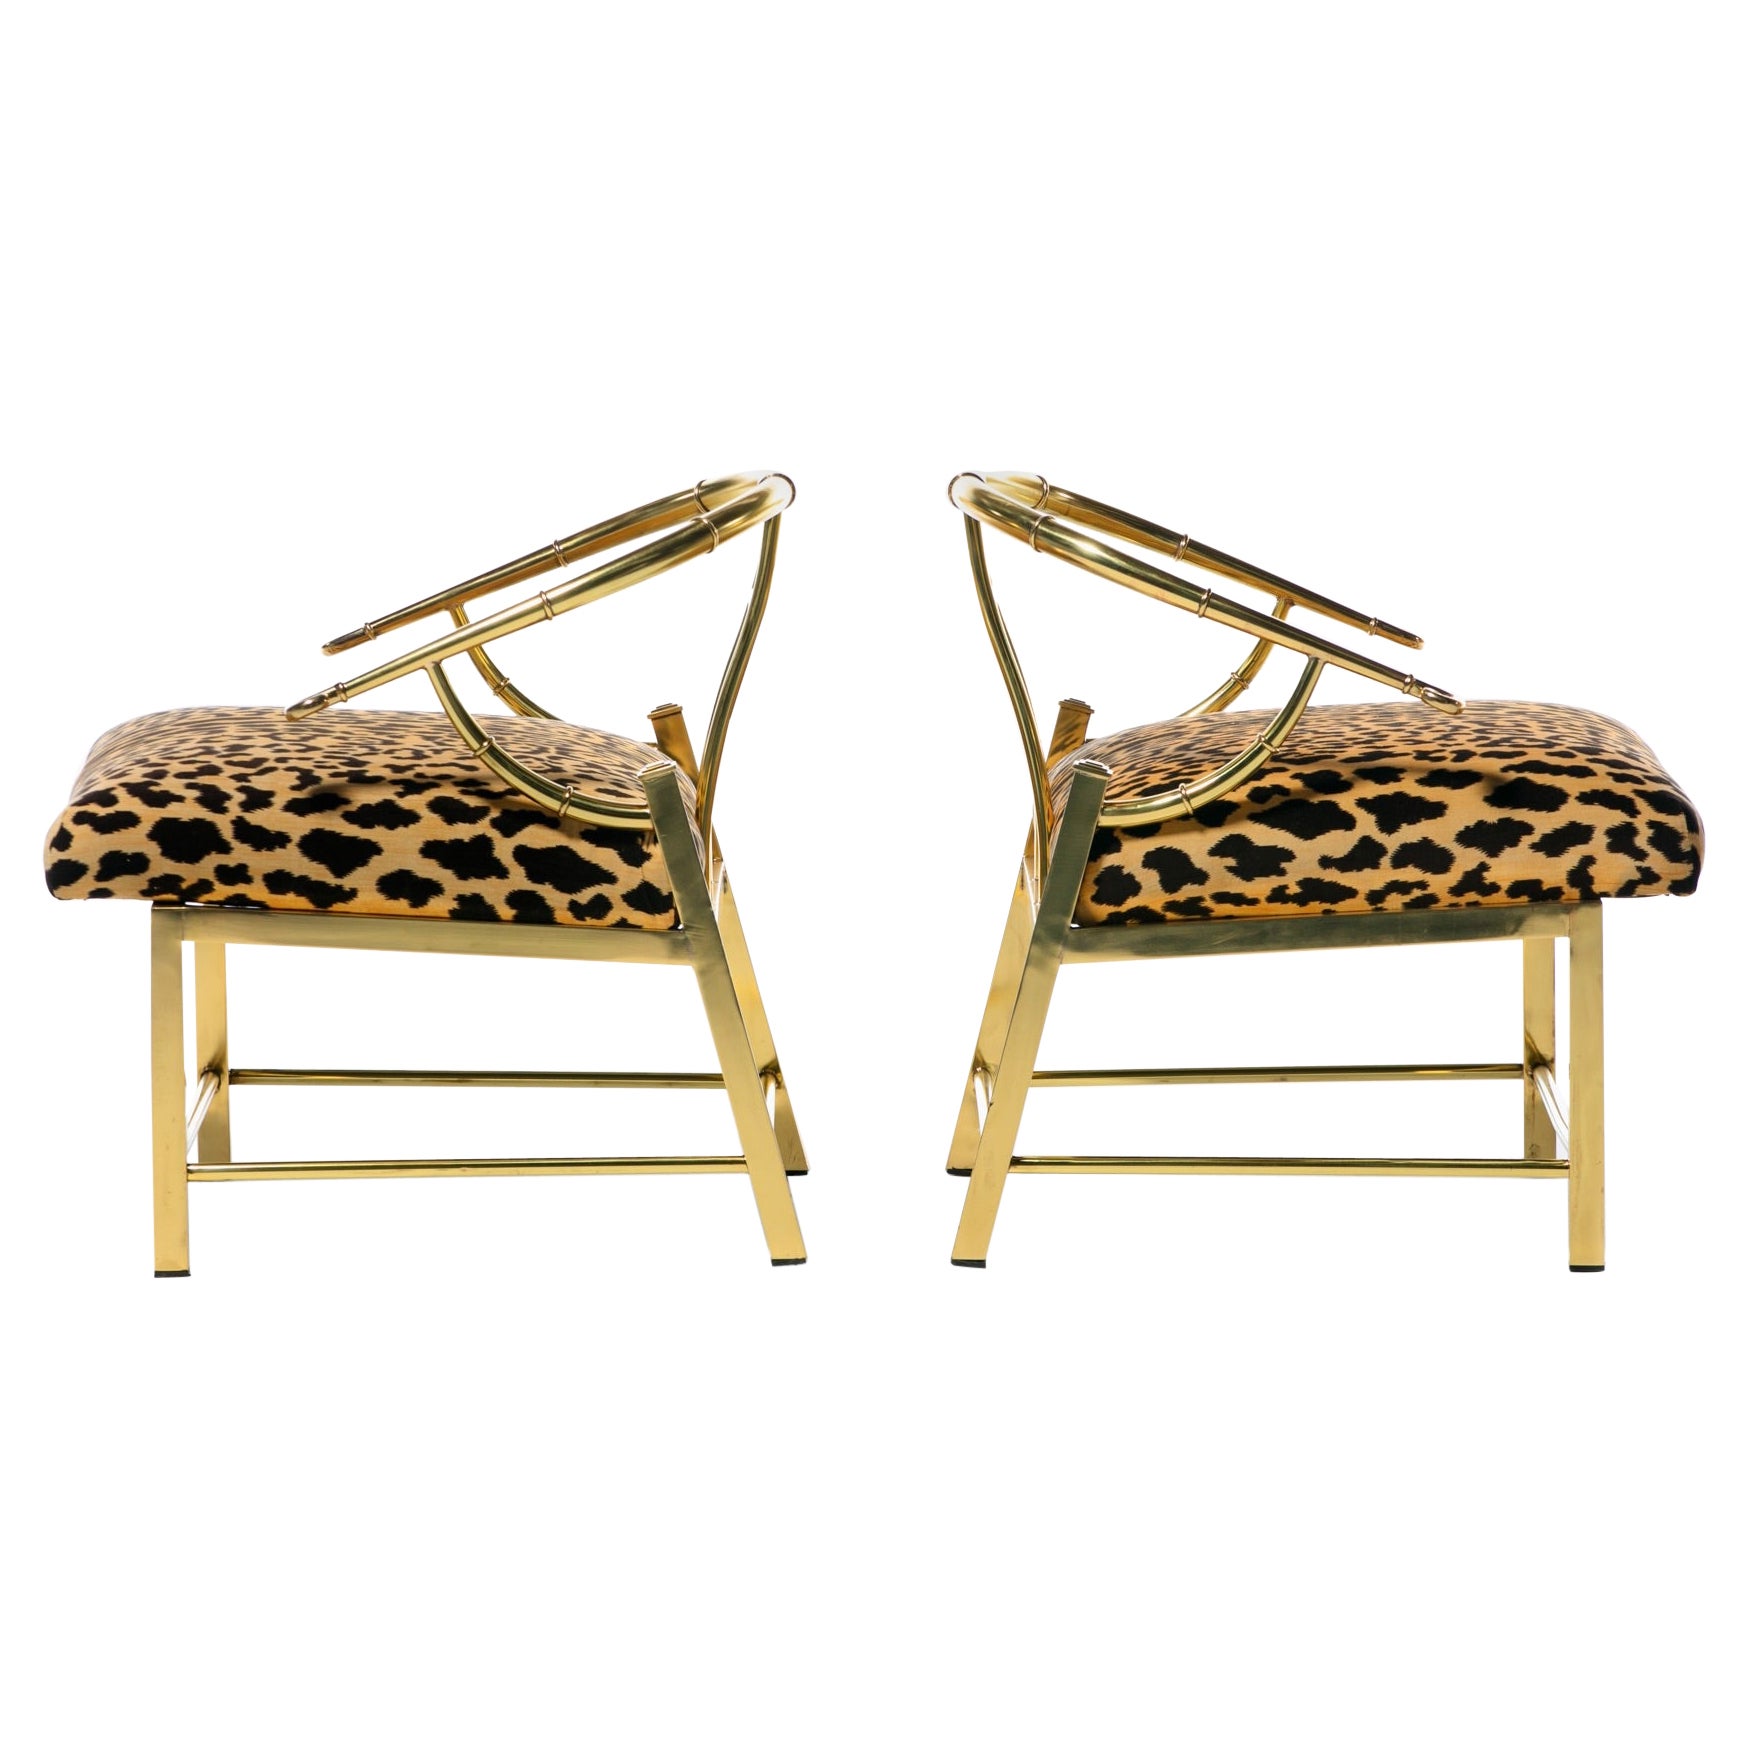 Pair of Brass Hollywood Regency Chairs in Leopard Velvet by Mastercraft C. 1960s